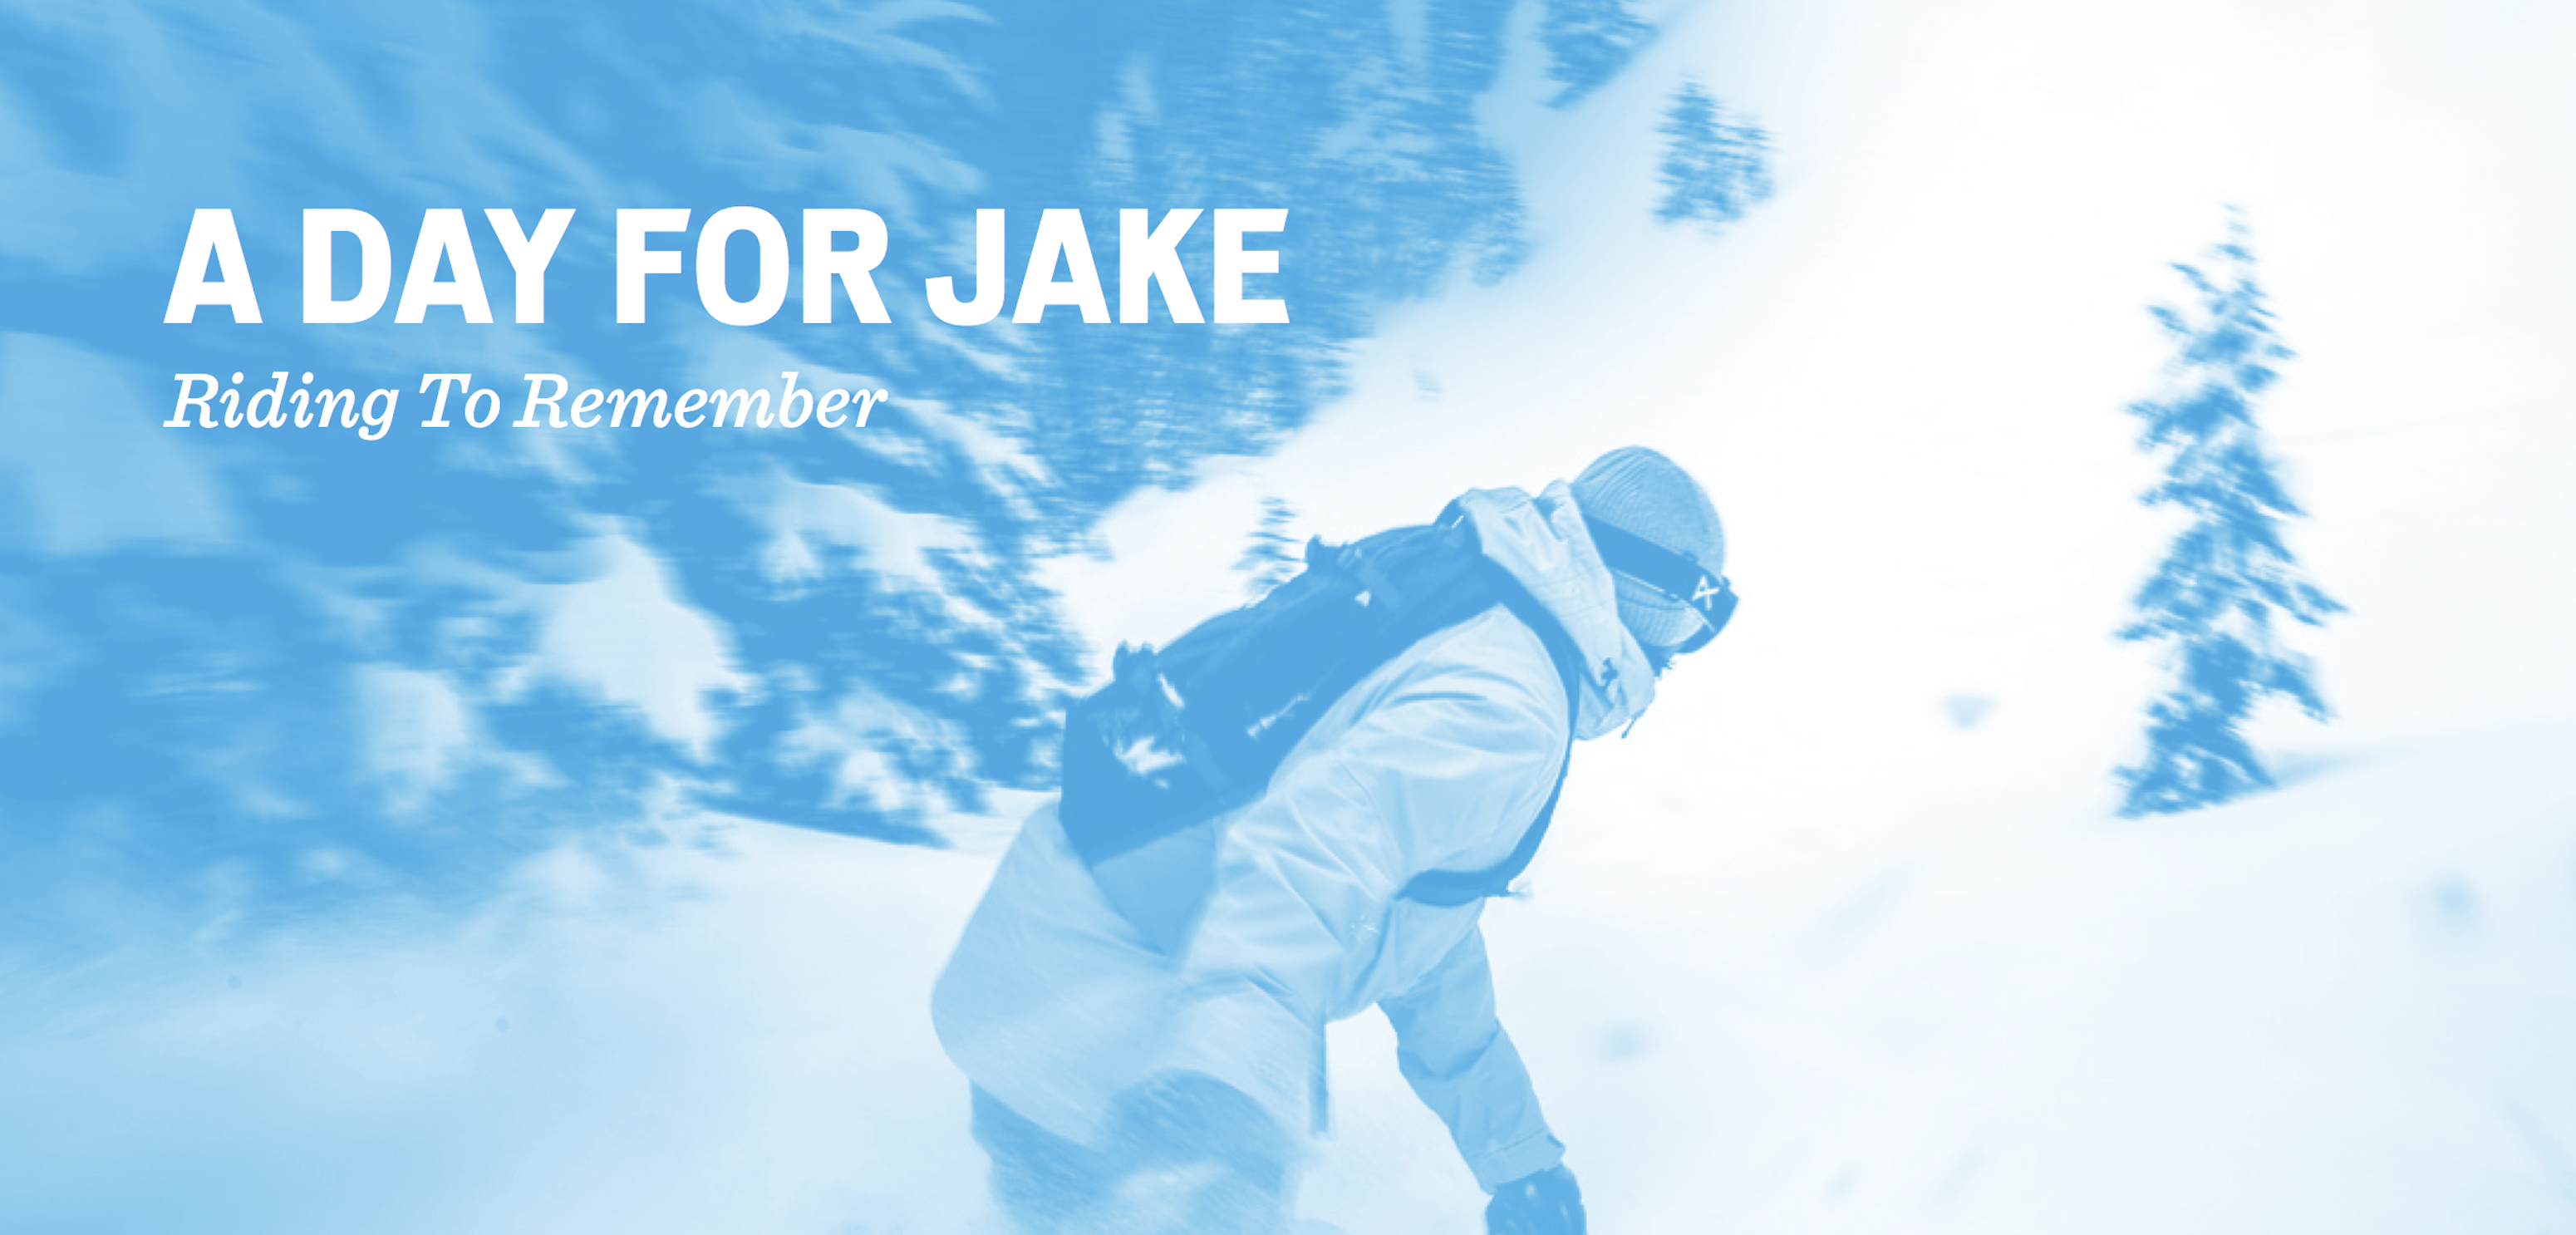 A Day For Jake